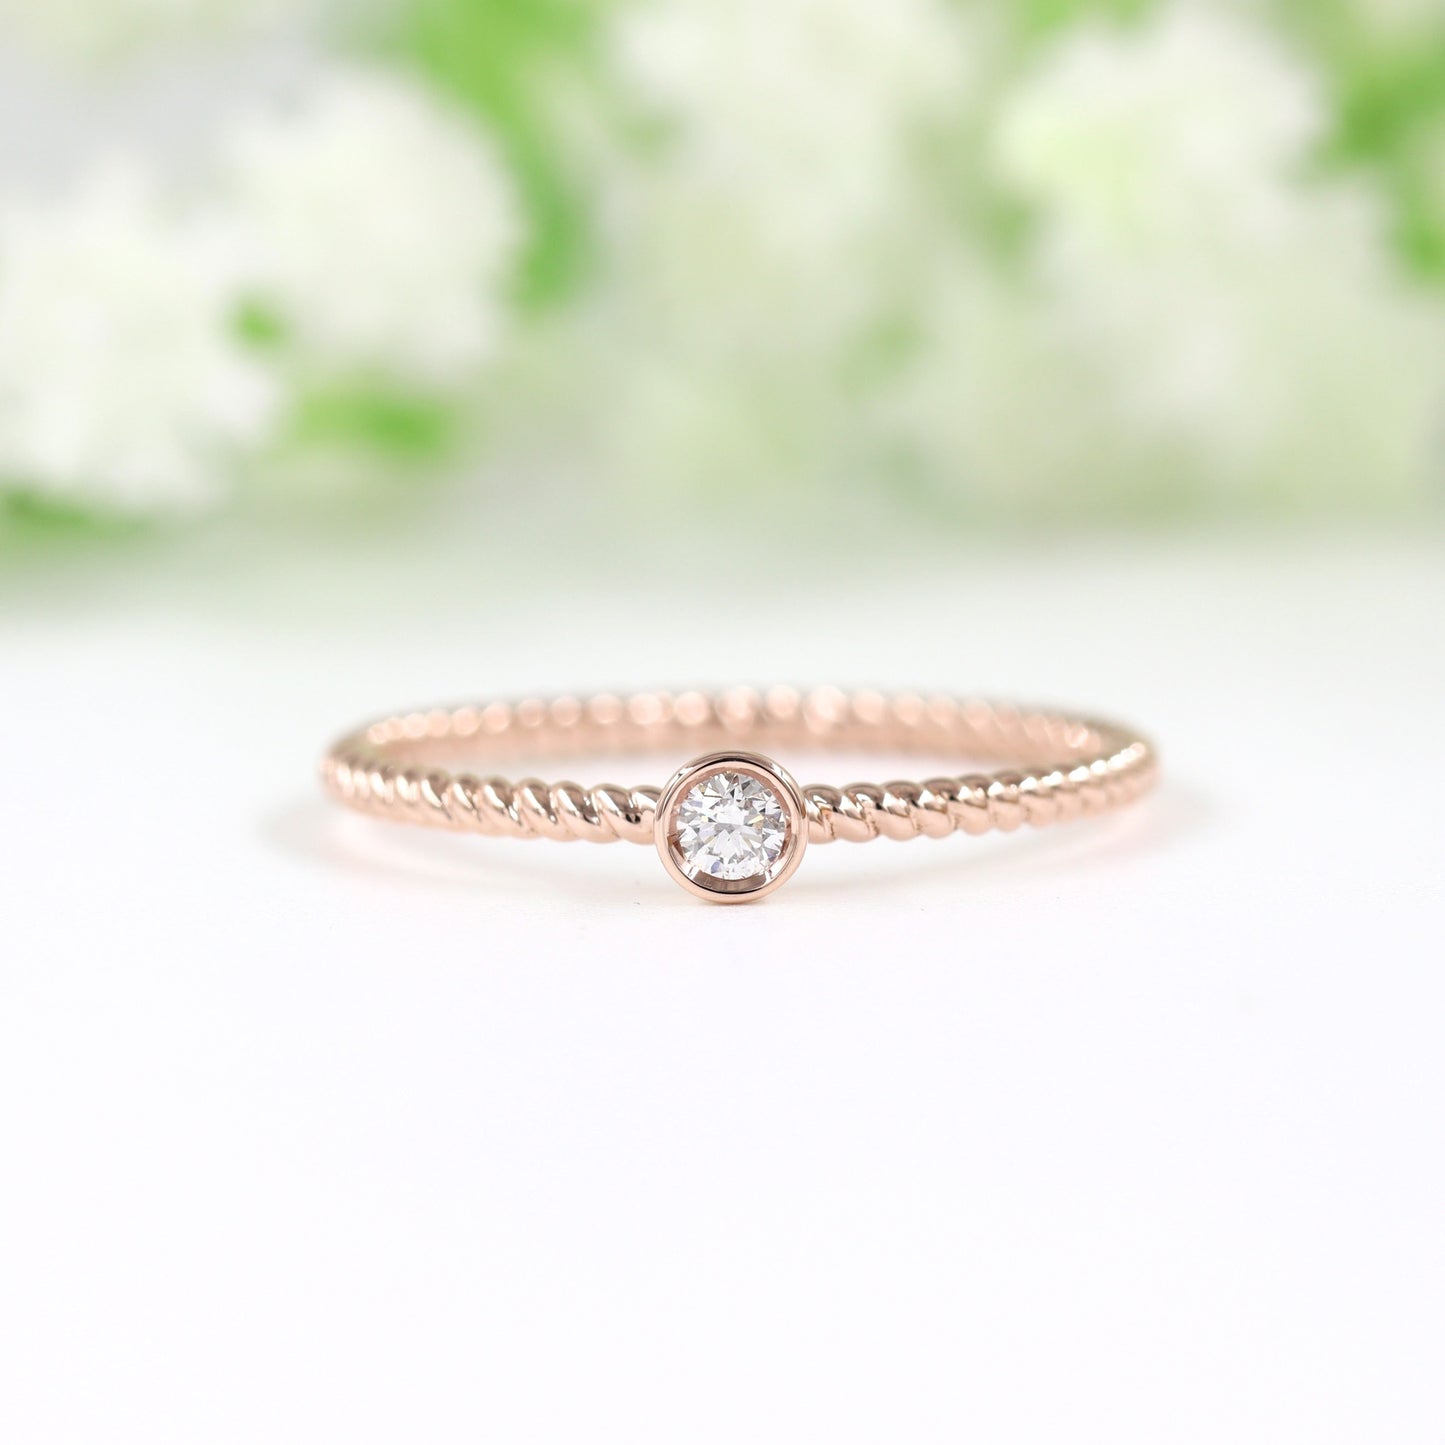 Single .05ct Diamond Wedding Ring/14K Gold Natural Diamond Ring/Simple Engagement Ring / Stackable Round Bezel Band/Twist Dainty Ring/Gift for her